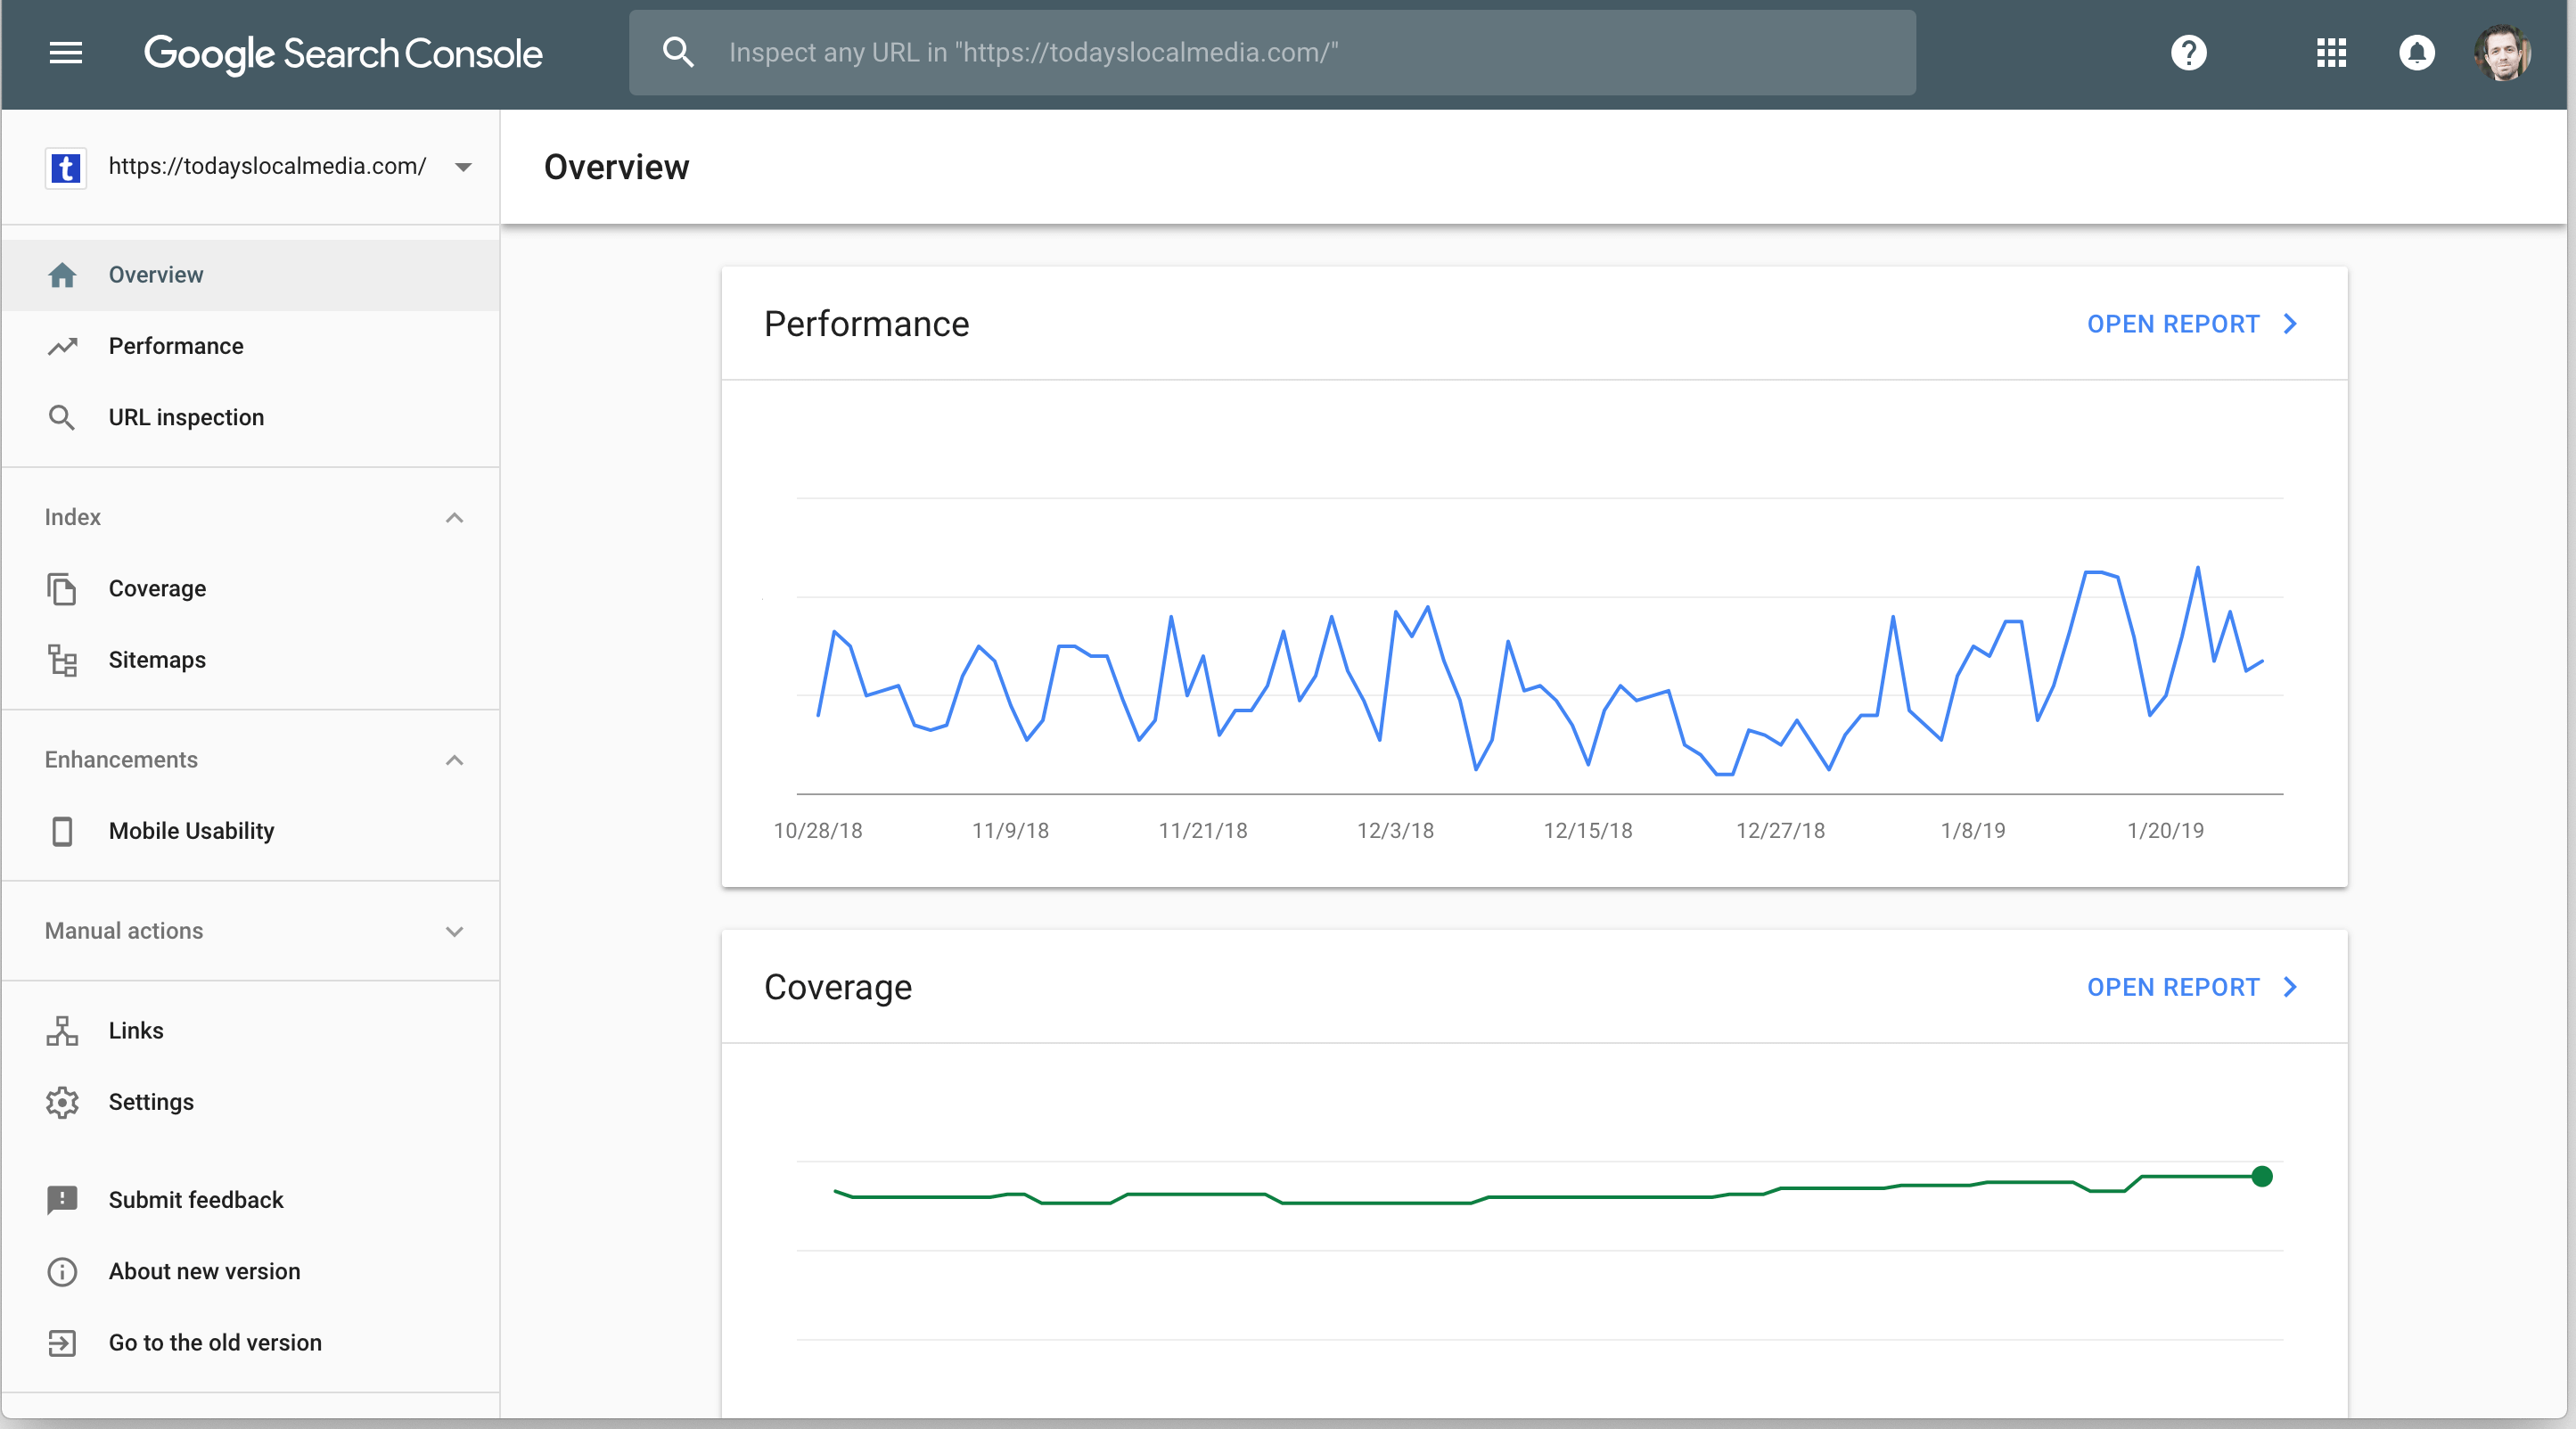 Image of Google Search Console's home page